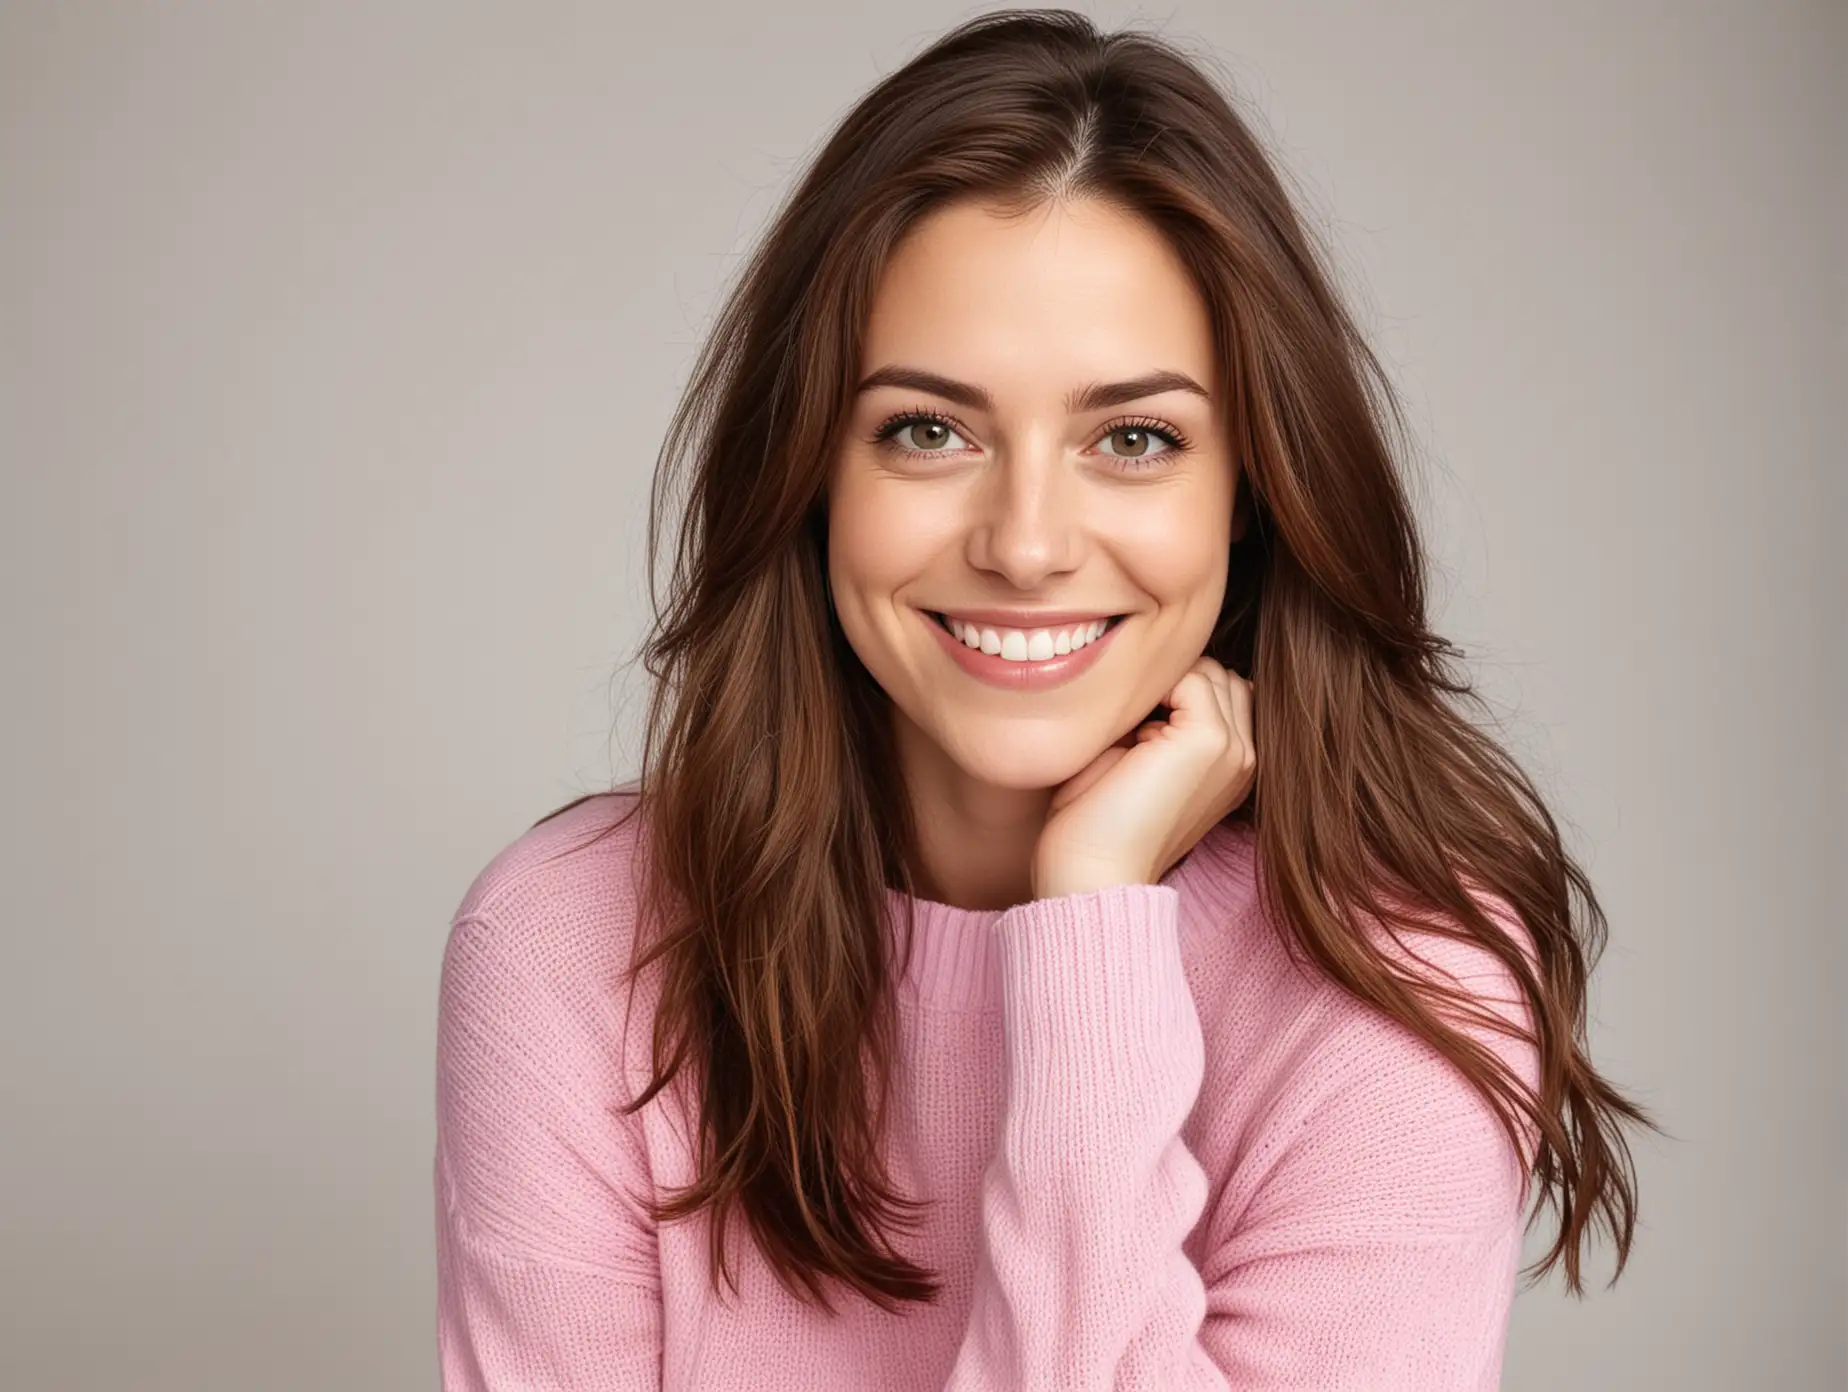 30 year old pale white woman with long chestnut brown hair parted to one side. She is smiling, wearing a pink sweater and blue jeans, looking to the left of camera against a white background